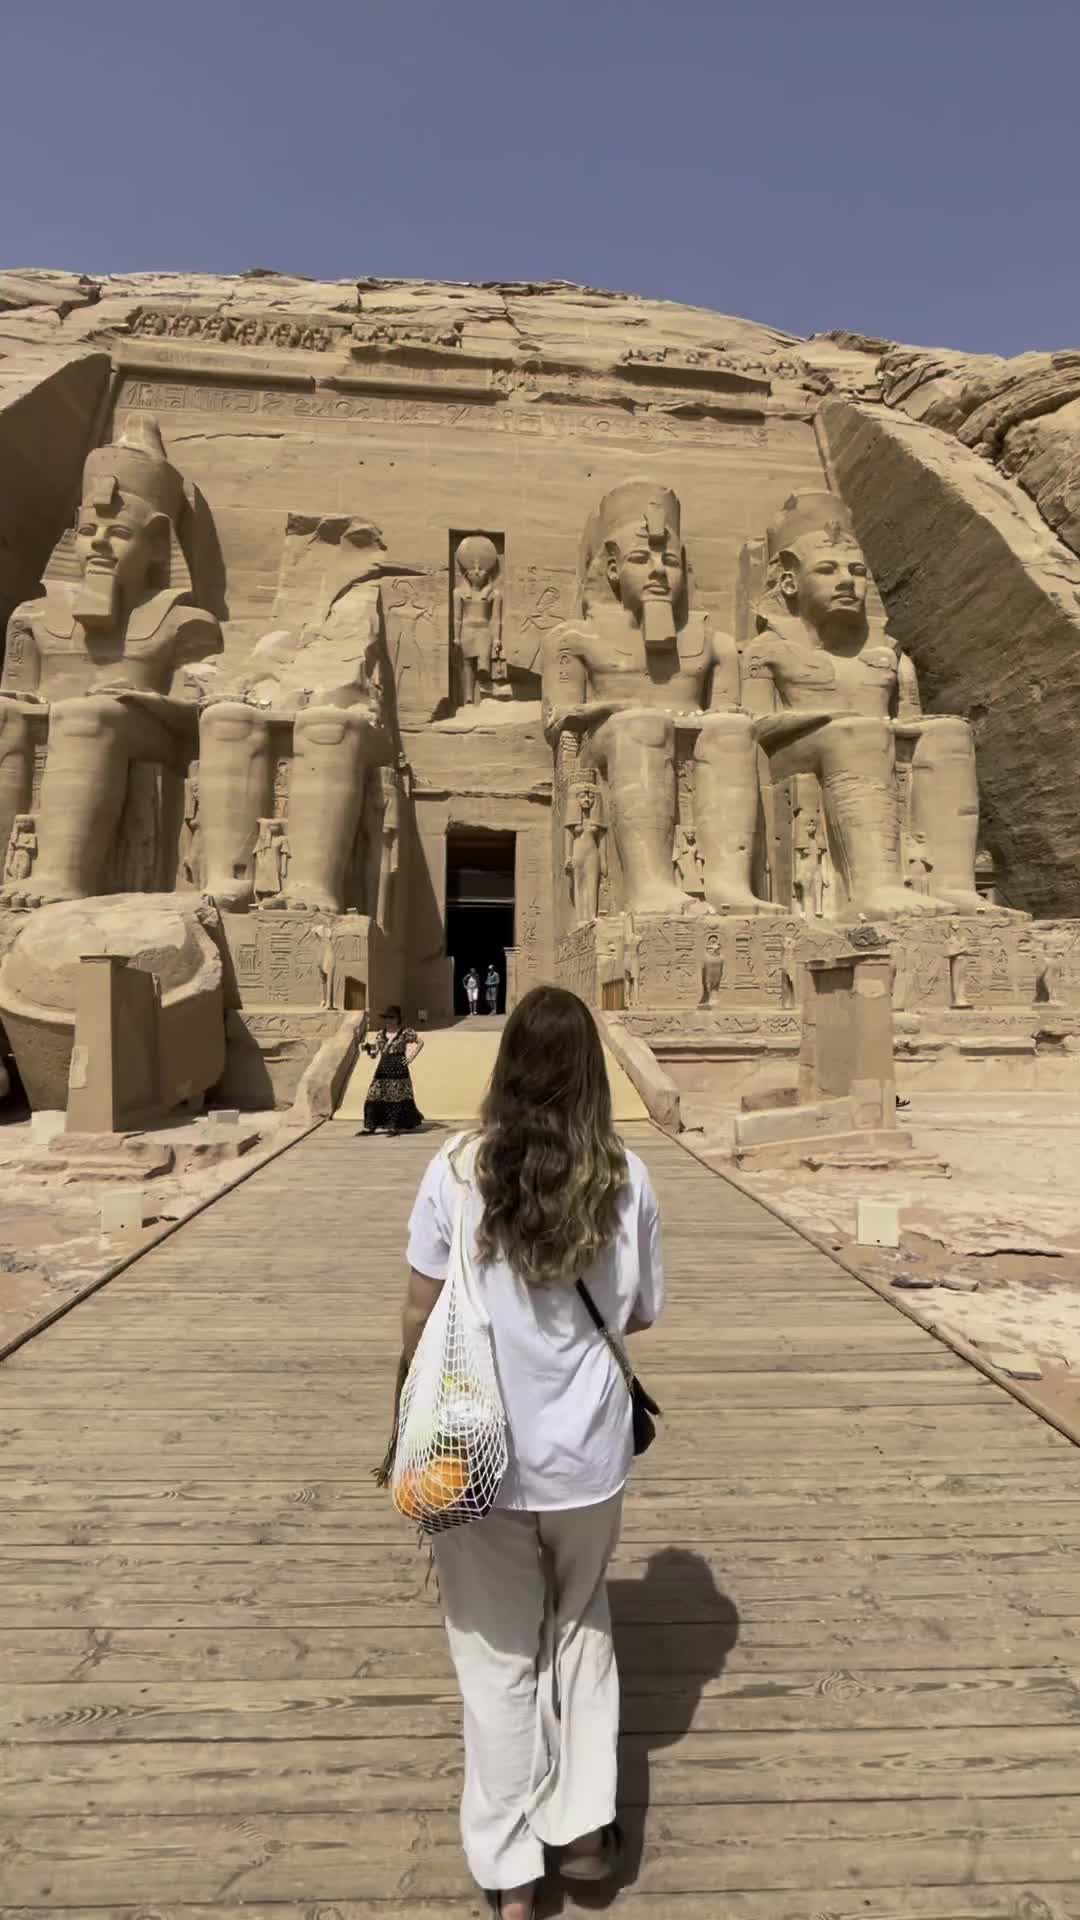 Me losing my mind that I’m actually here and not just looking at it on a screen 😮 one of the most amazing things I’ve ever seen. 
📍Abu Simbel Temple, Aswan.